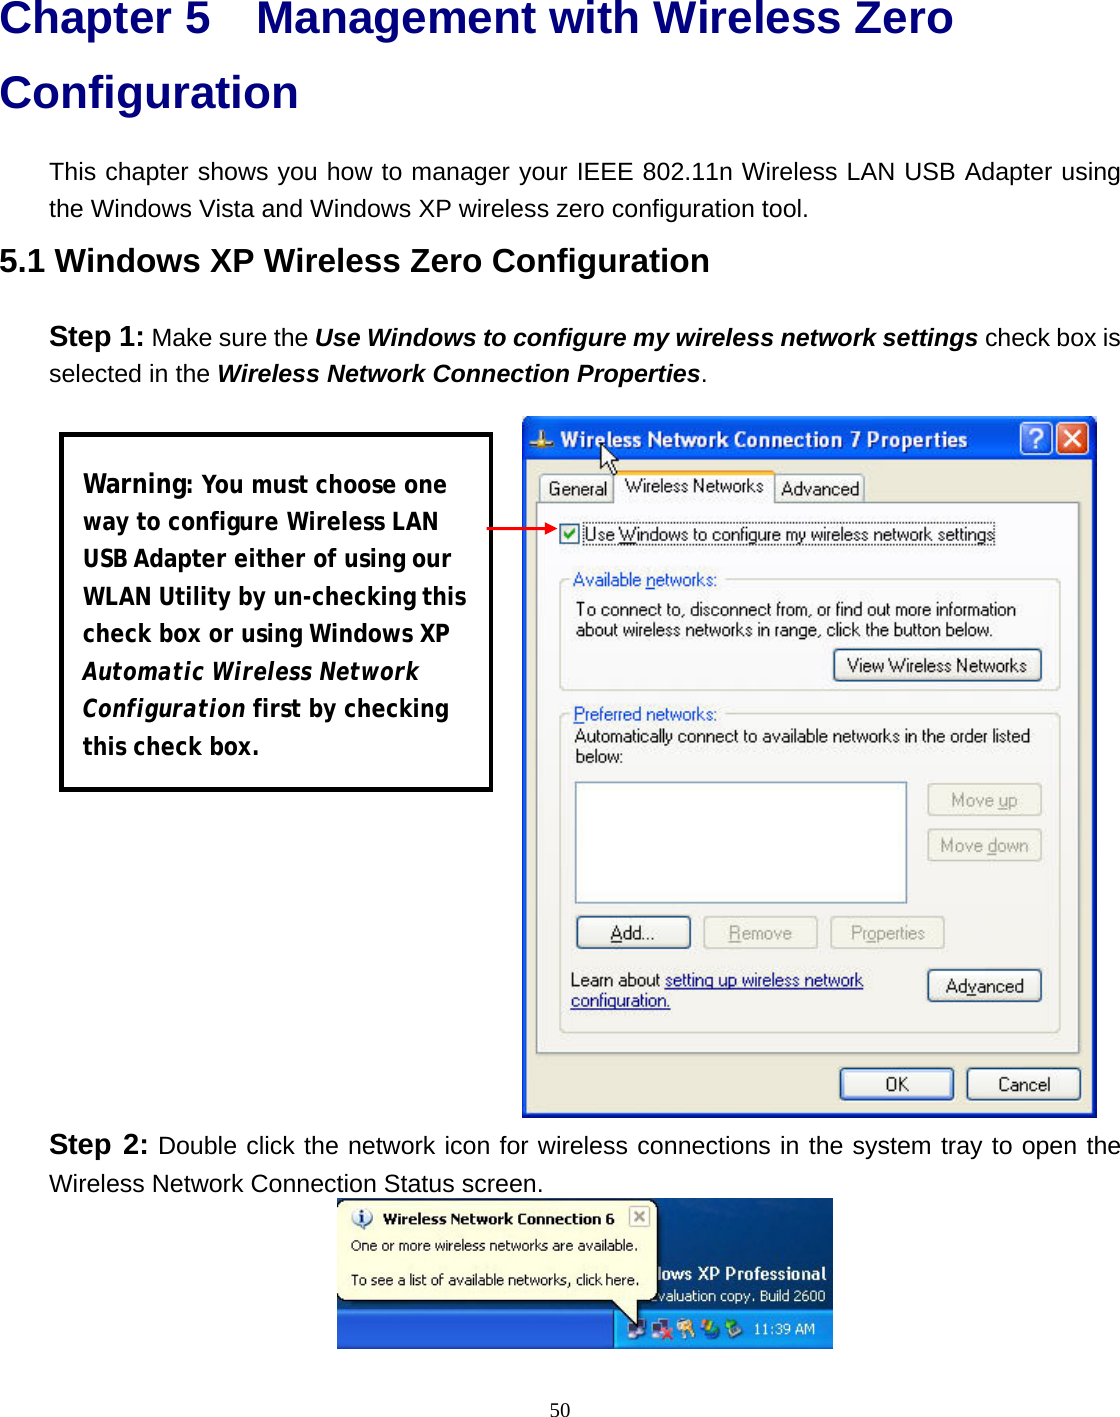  50 Chapter 5 Management with Wireless Zero Configuration This chapter shows you how to manager your IEEE 802.11n Wireless LAN USB Adapter using the Windows Vista and Windows XP wireless zero configuration tool. 5.1 Windows XP Wireless Zero Configuration Step 1: Make sure the Use Windows to configure my wireless network settings check box is selected in the Wireless Network Connection Properties.  Step 2: Double click the network icon for wireless connections in the system tray to open the Wireless Network Connection Status screen.  Warning: You must choose one way to configure Wireless LAN USB Adapter either of using our WLAN Utility by un-checking this check box or using Windows XP Automatic Wireless Network Configuration first by checking this check box. 